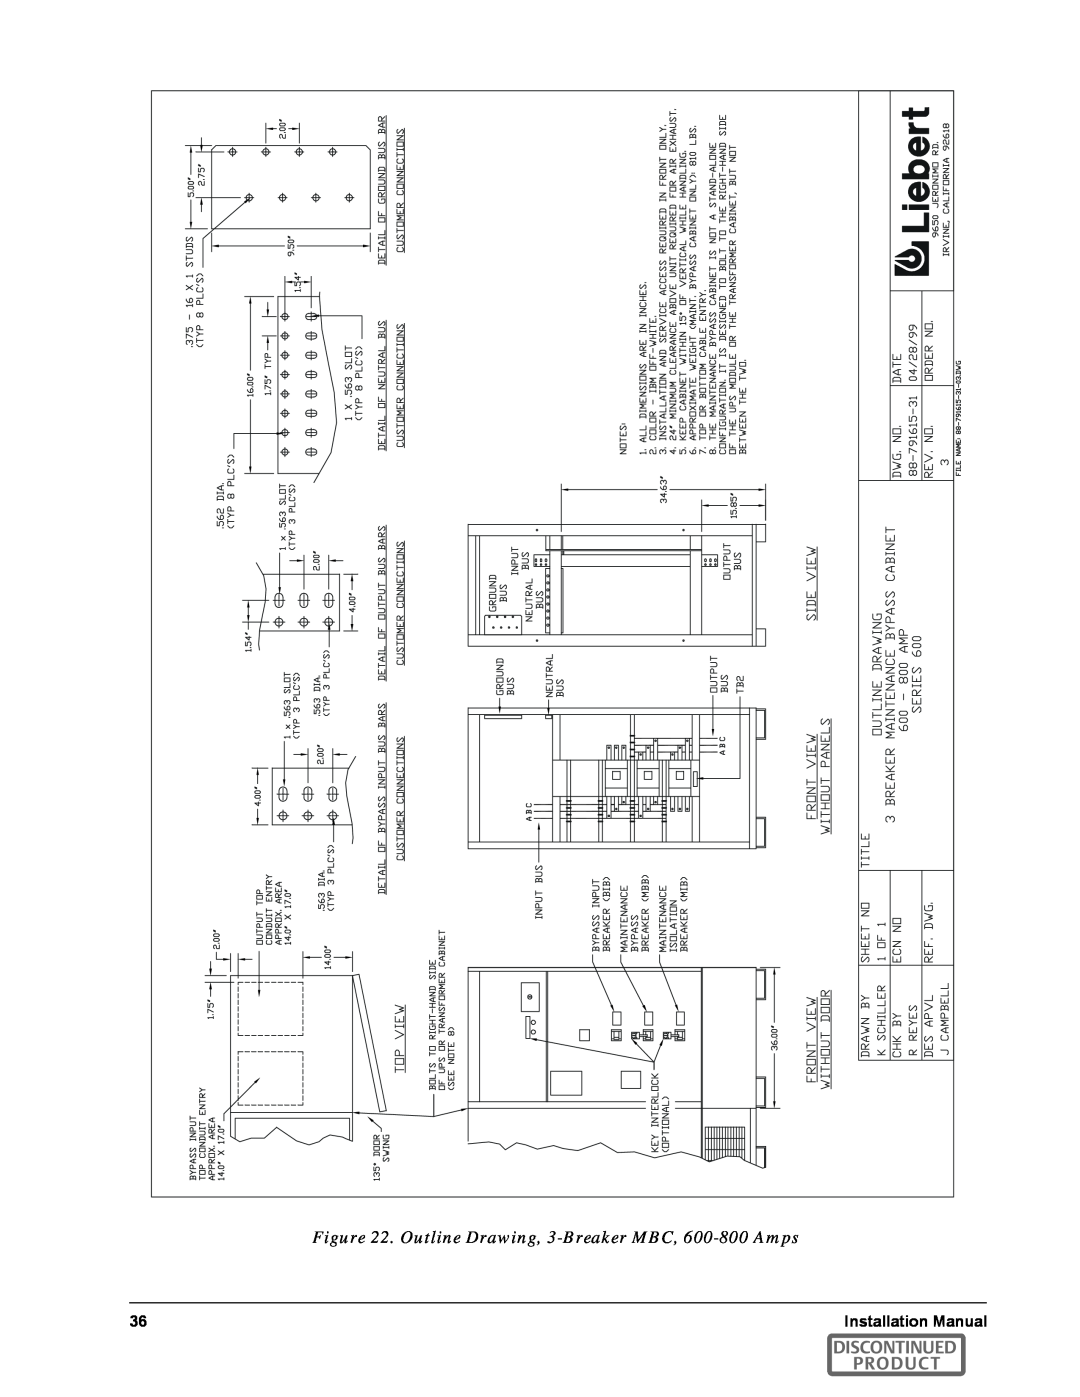 Emerson SERIES 600T manual Outline Drawing, 3-Breaker MBC, 600-800 Amps, Discontinued Product 